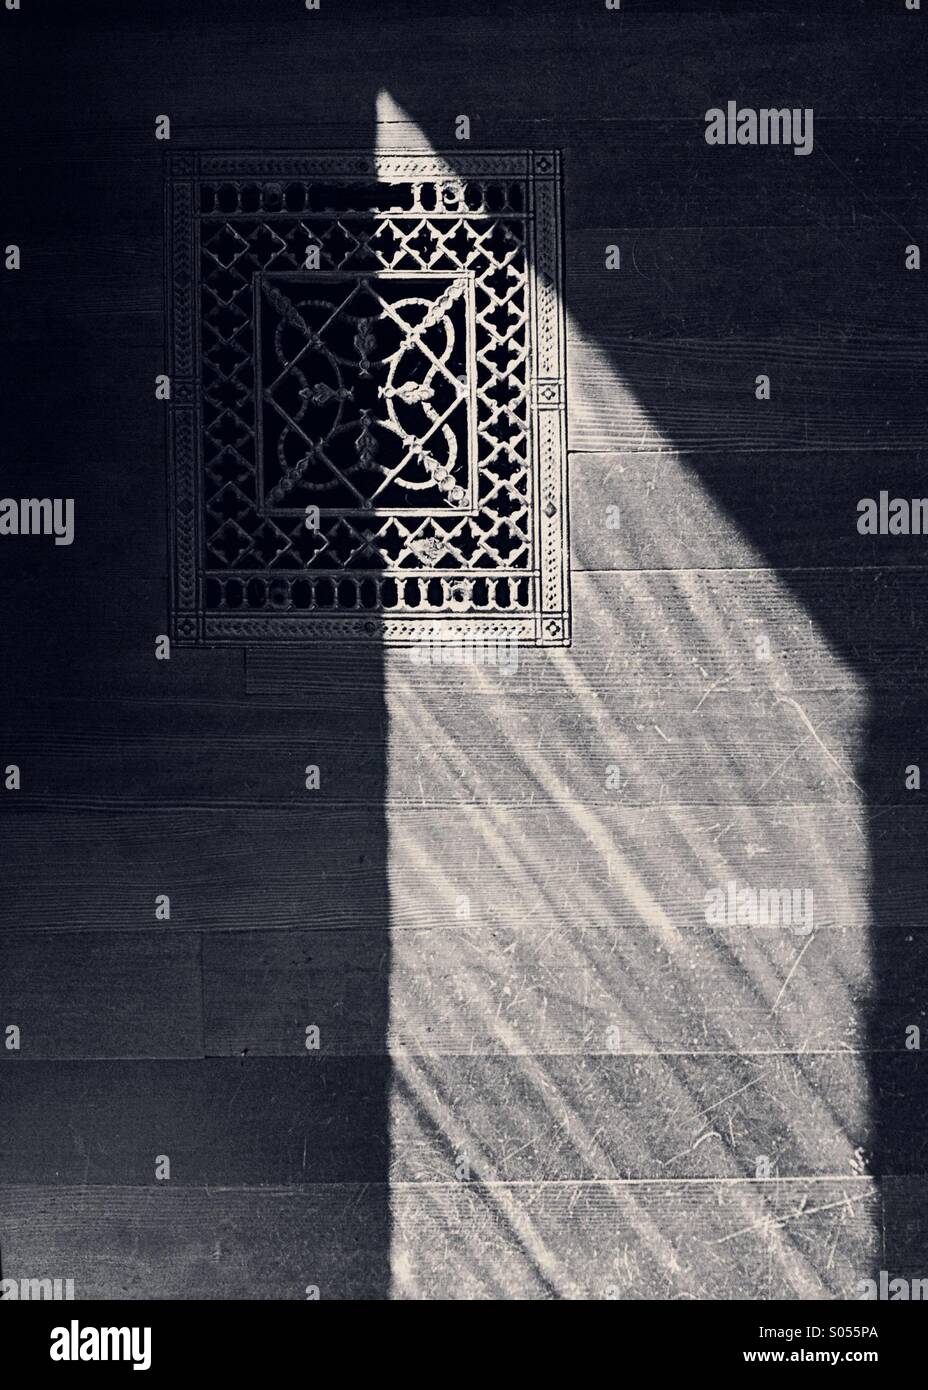 Pattern of light forms a triangular shape across an old wooden floor and antique metal heating vent. Stock Photo